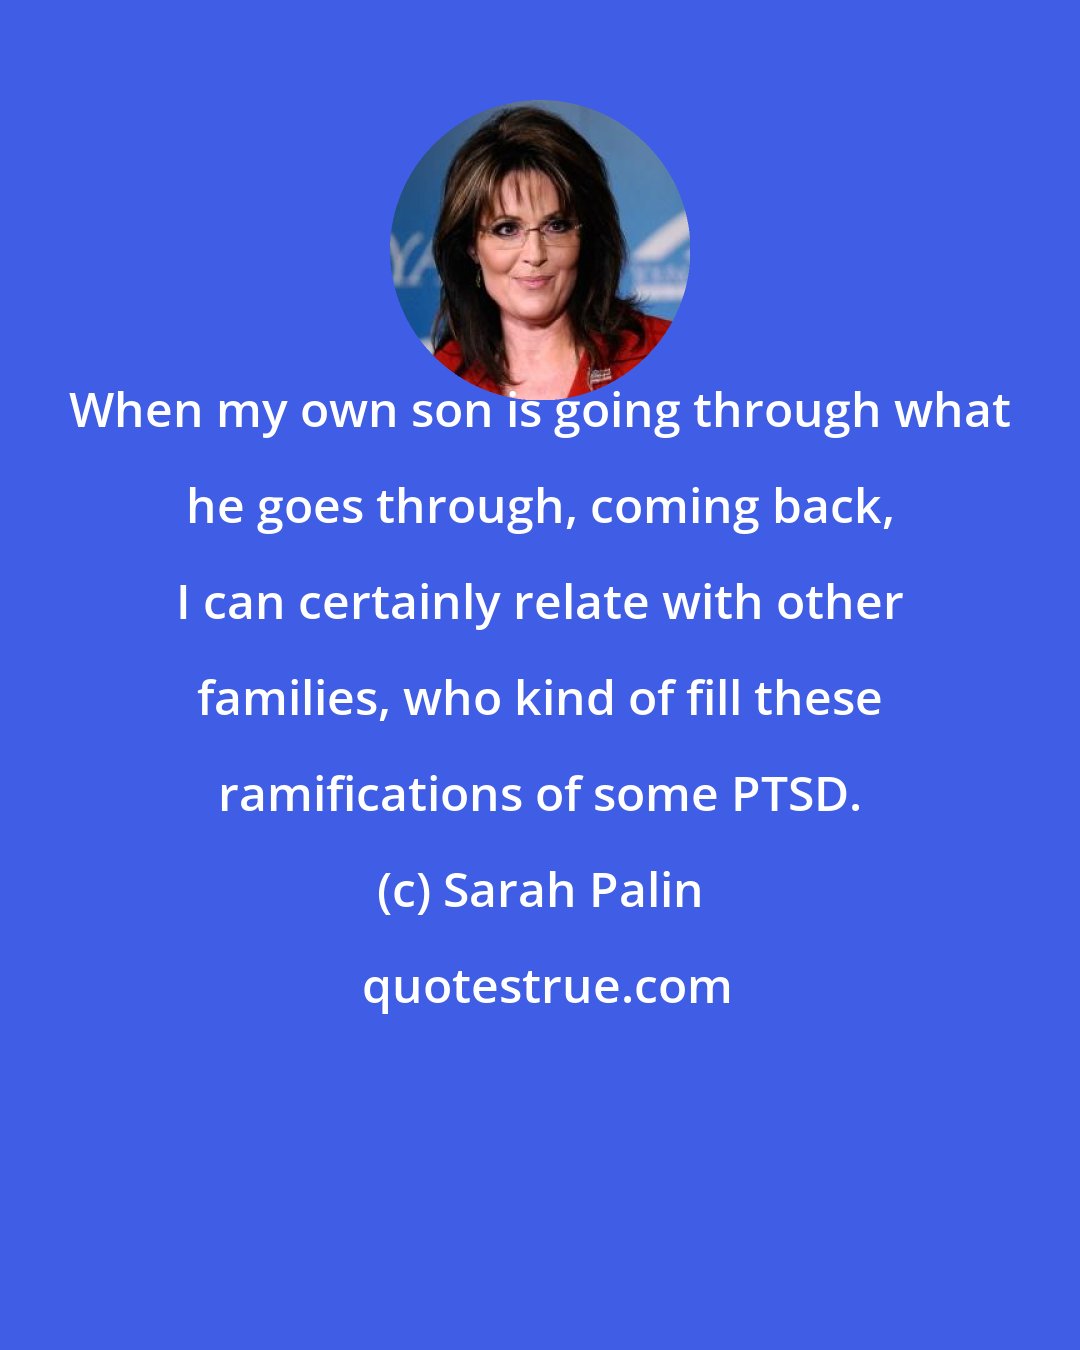 Sarah Palin: When my own son is going through what he goes through, coming back, I can certainly relate with other families, who kind of fill these ramifications of some PTSD.